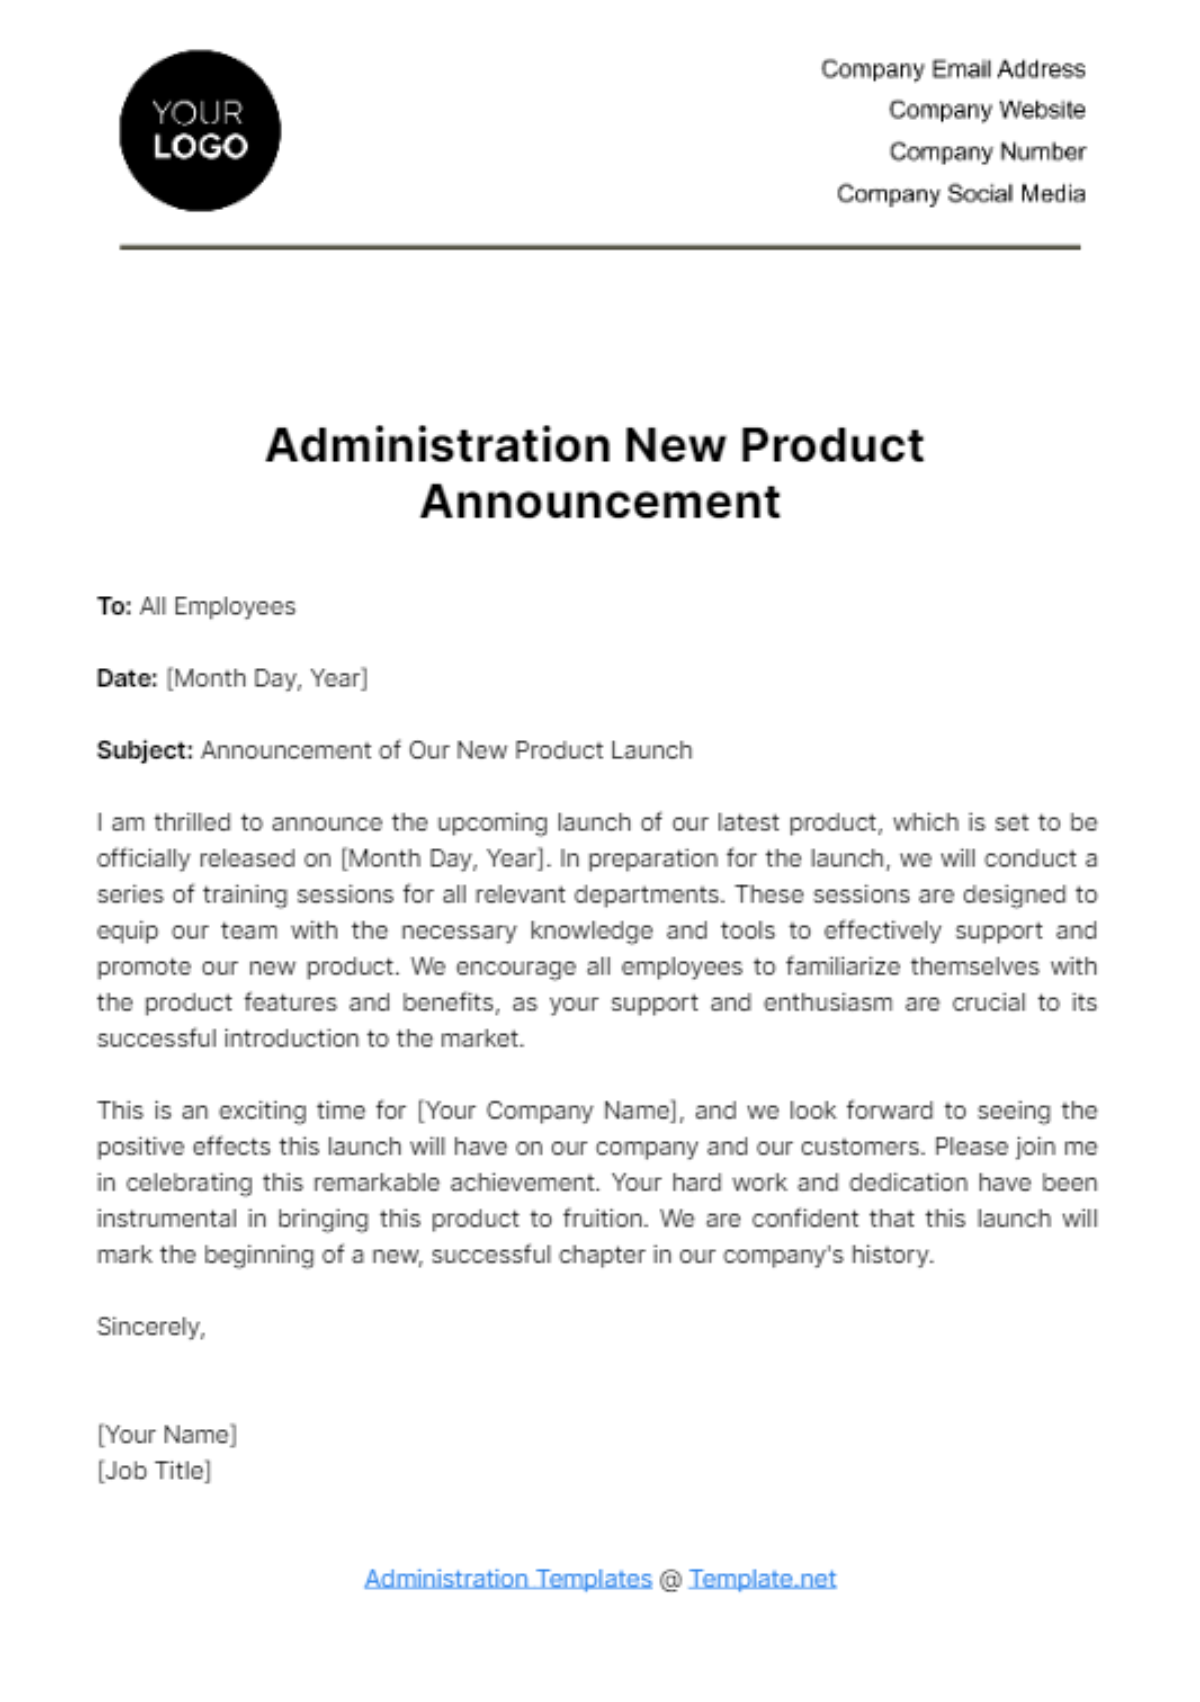 Free Administration New Product Announcement Template